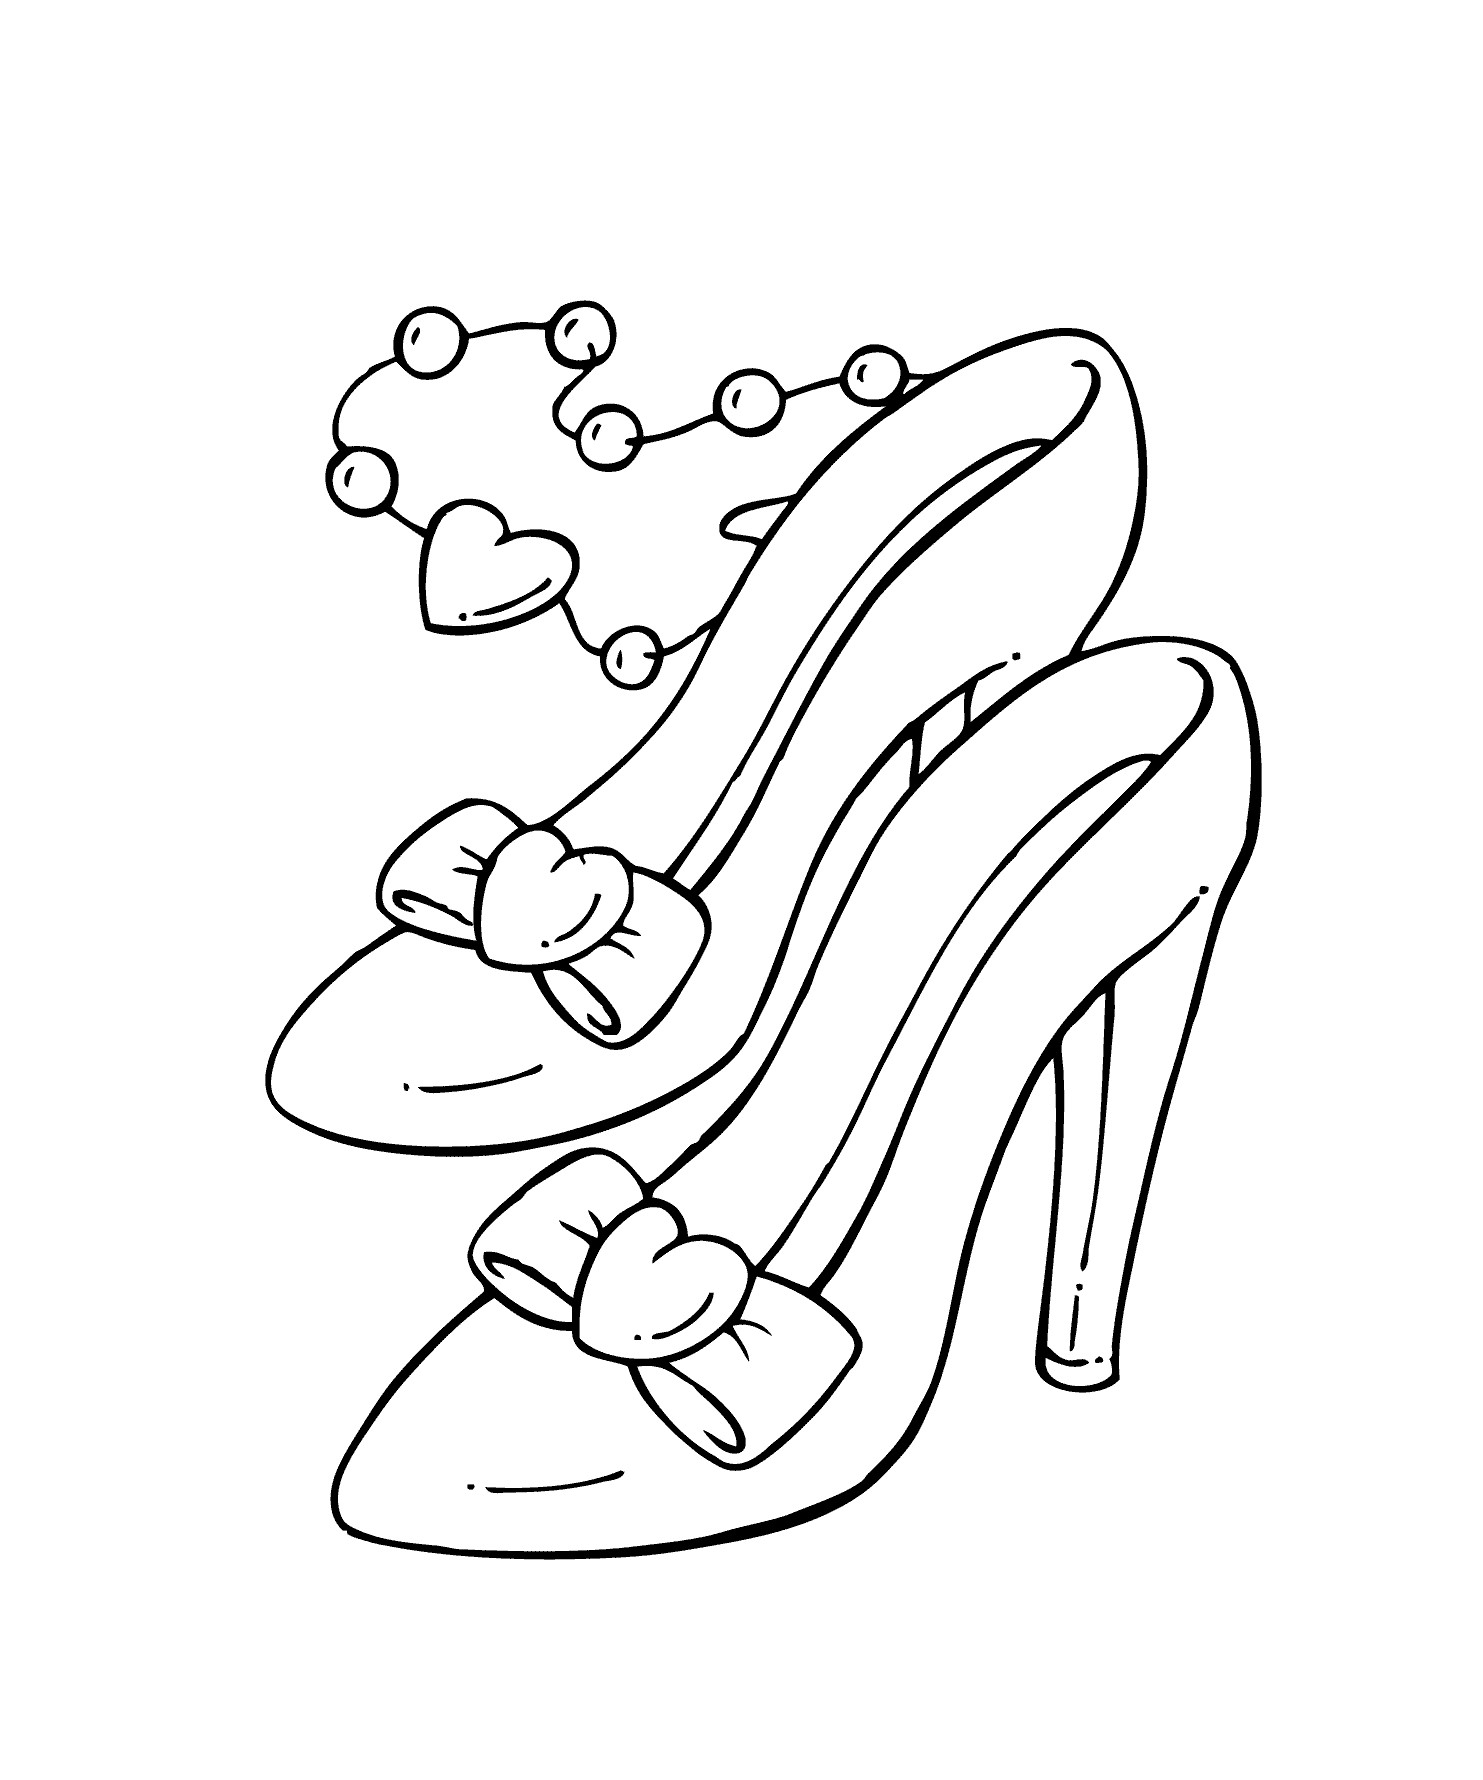 High Heel Coloring Pages at GetColorings.com | Free printable colorings